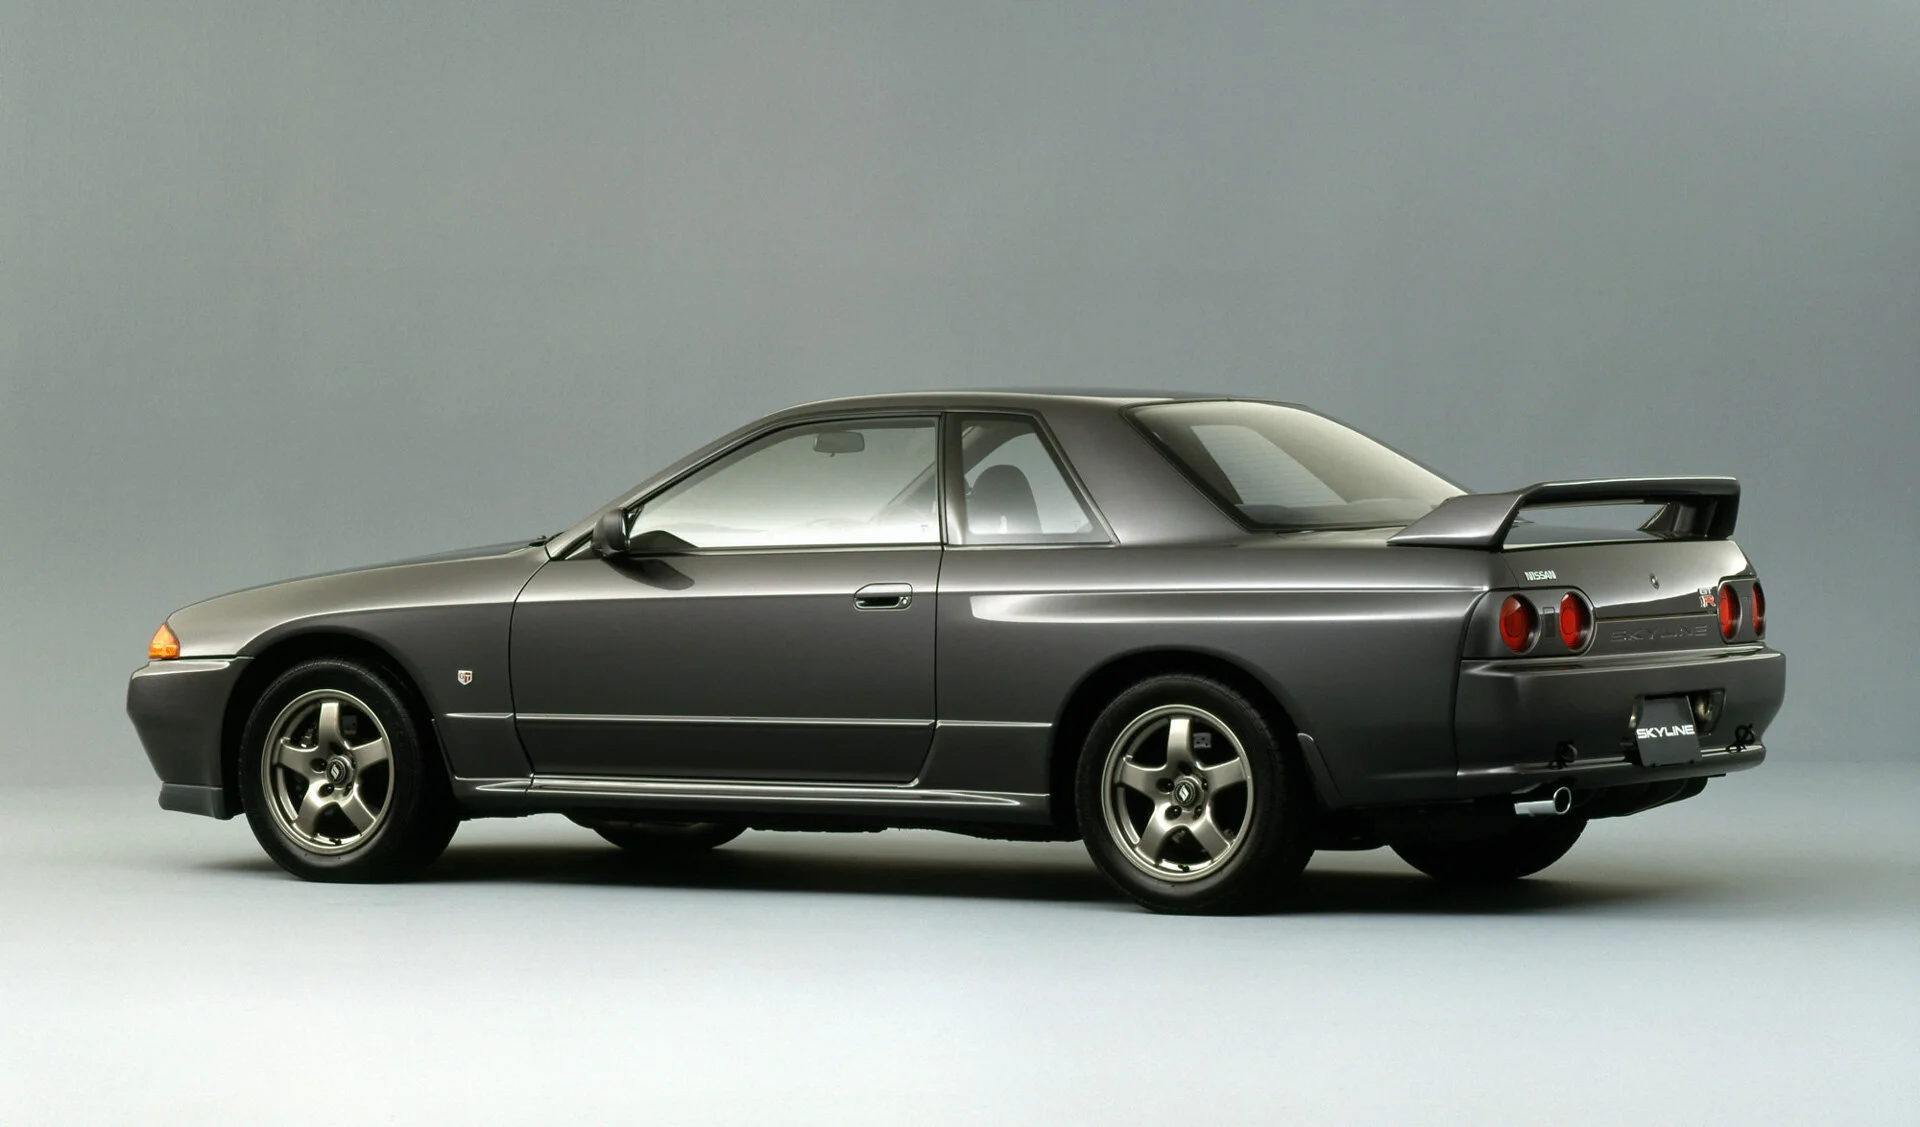 From the Nissan Skyline GT-R made an electric car